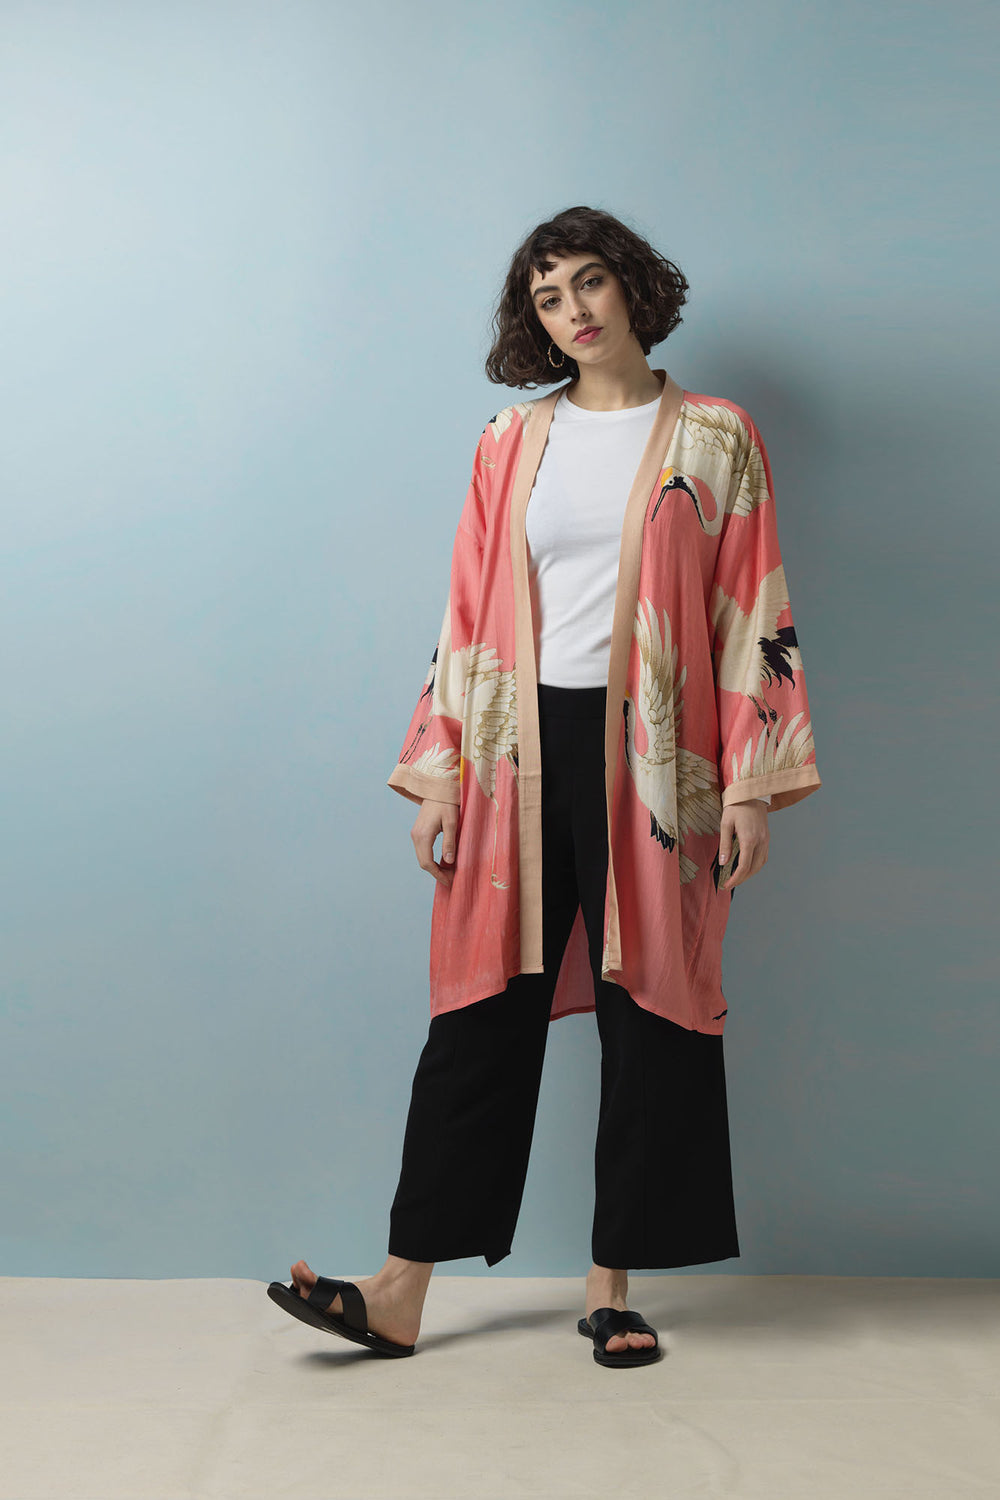 The One Hundred Stars Stork Lipstick Pink Collar Kimonos are great for laying over any outfit to add some colour to your wardrobe this season. Easily styled with a white shirt and black culottes, these kimonos are easy to wear. 